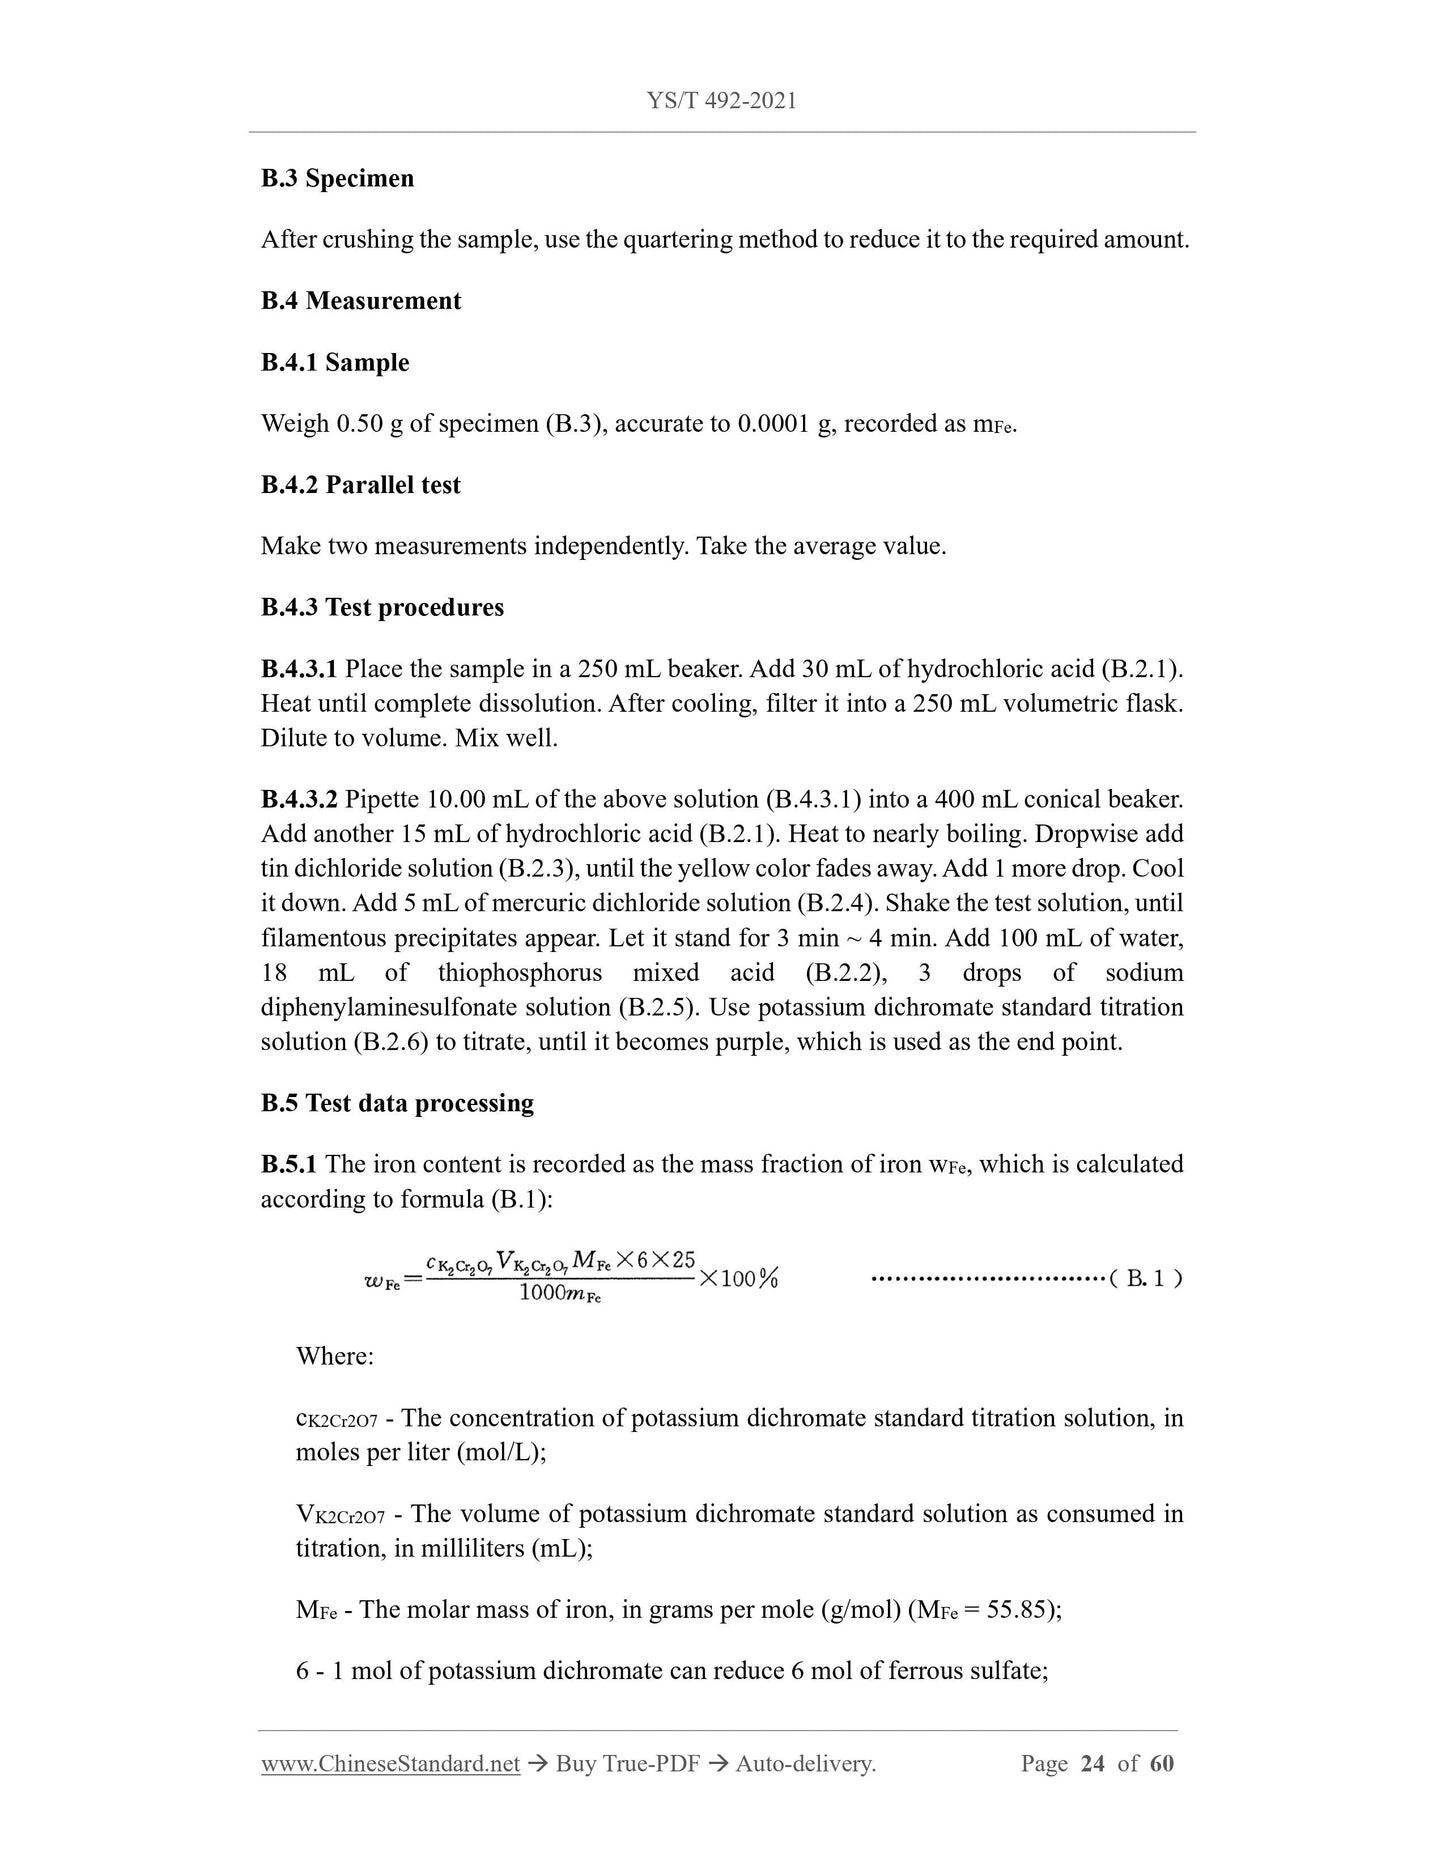 YS/T 492-2021 Page 7